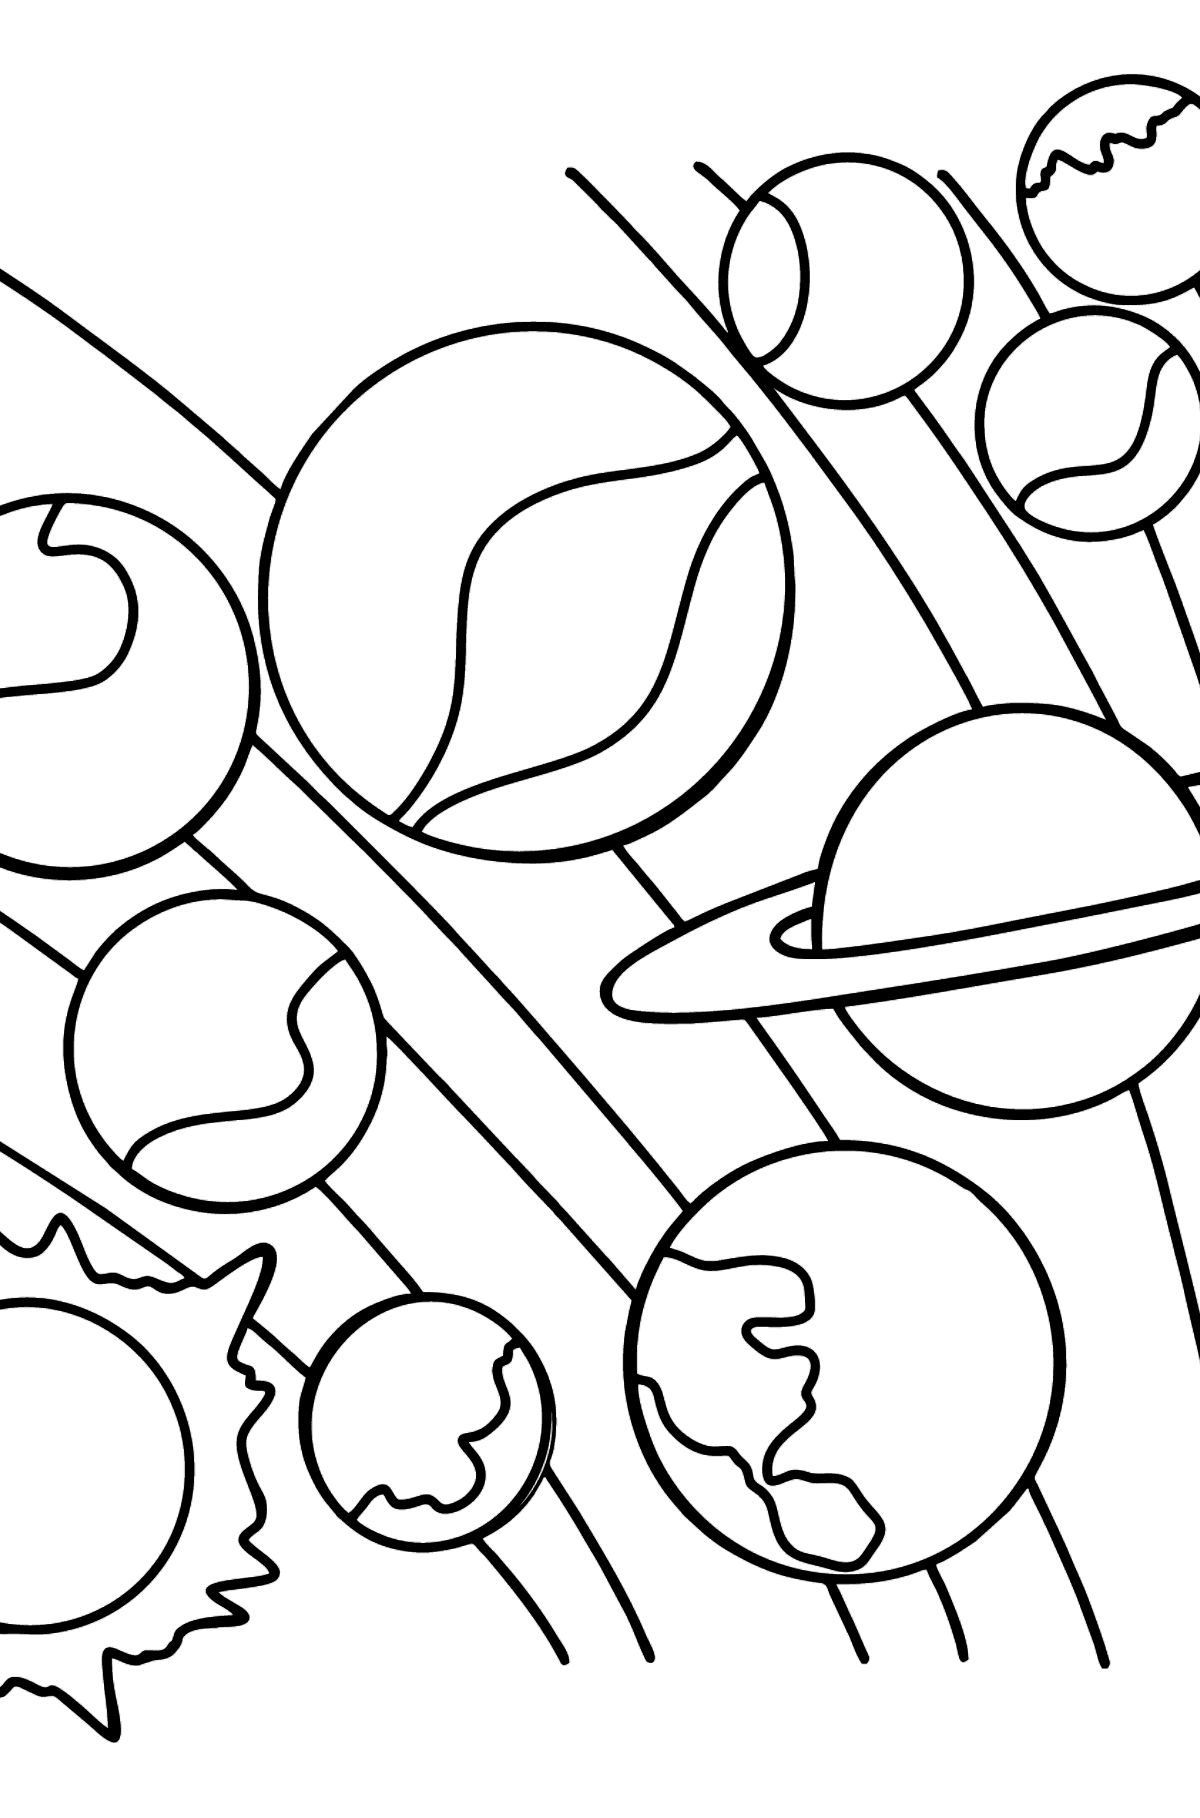 Solar System coloring page - Coloring Pages for Kids